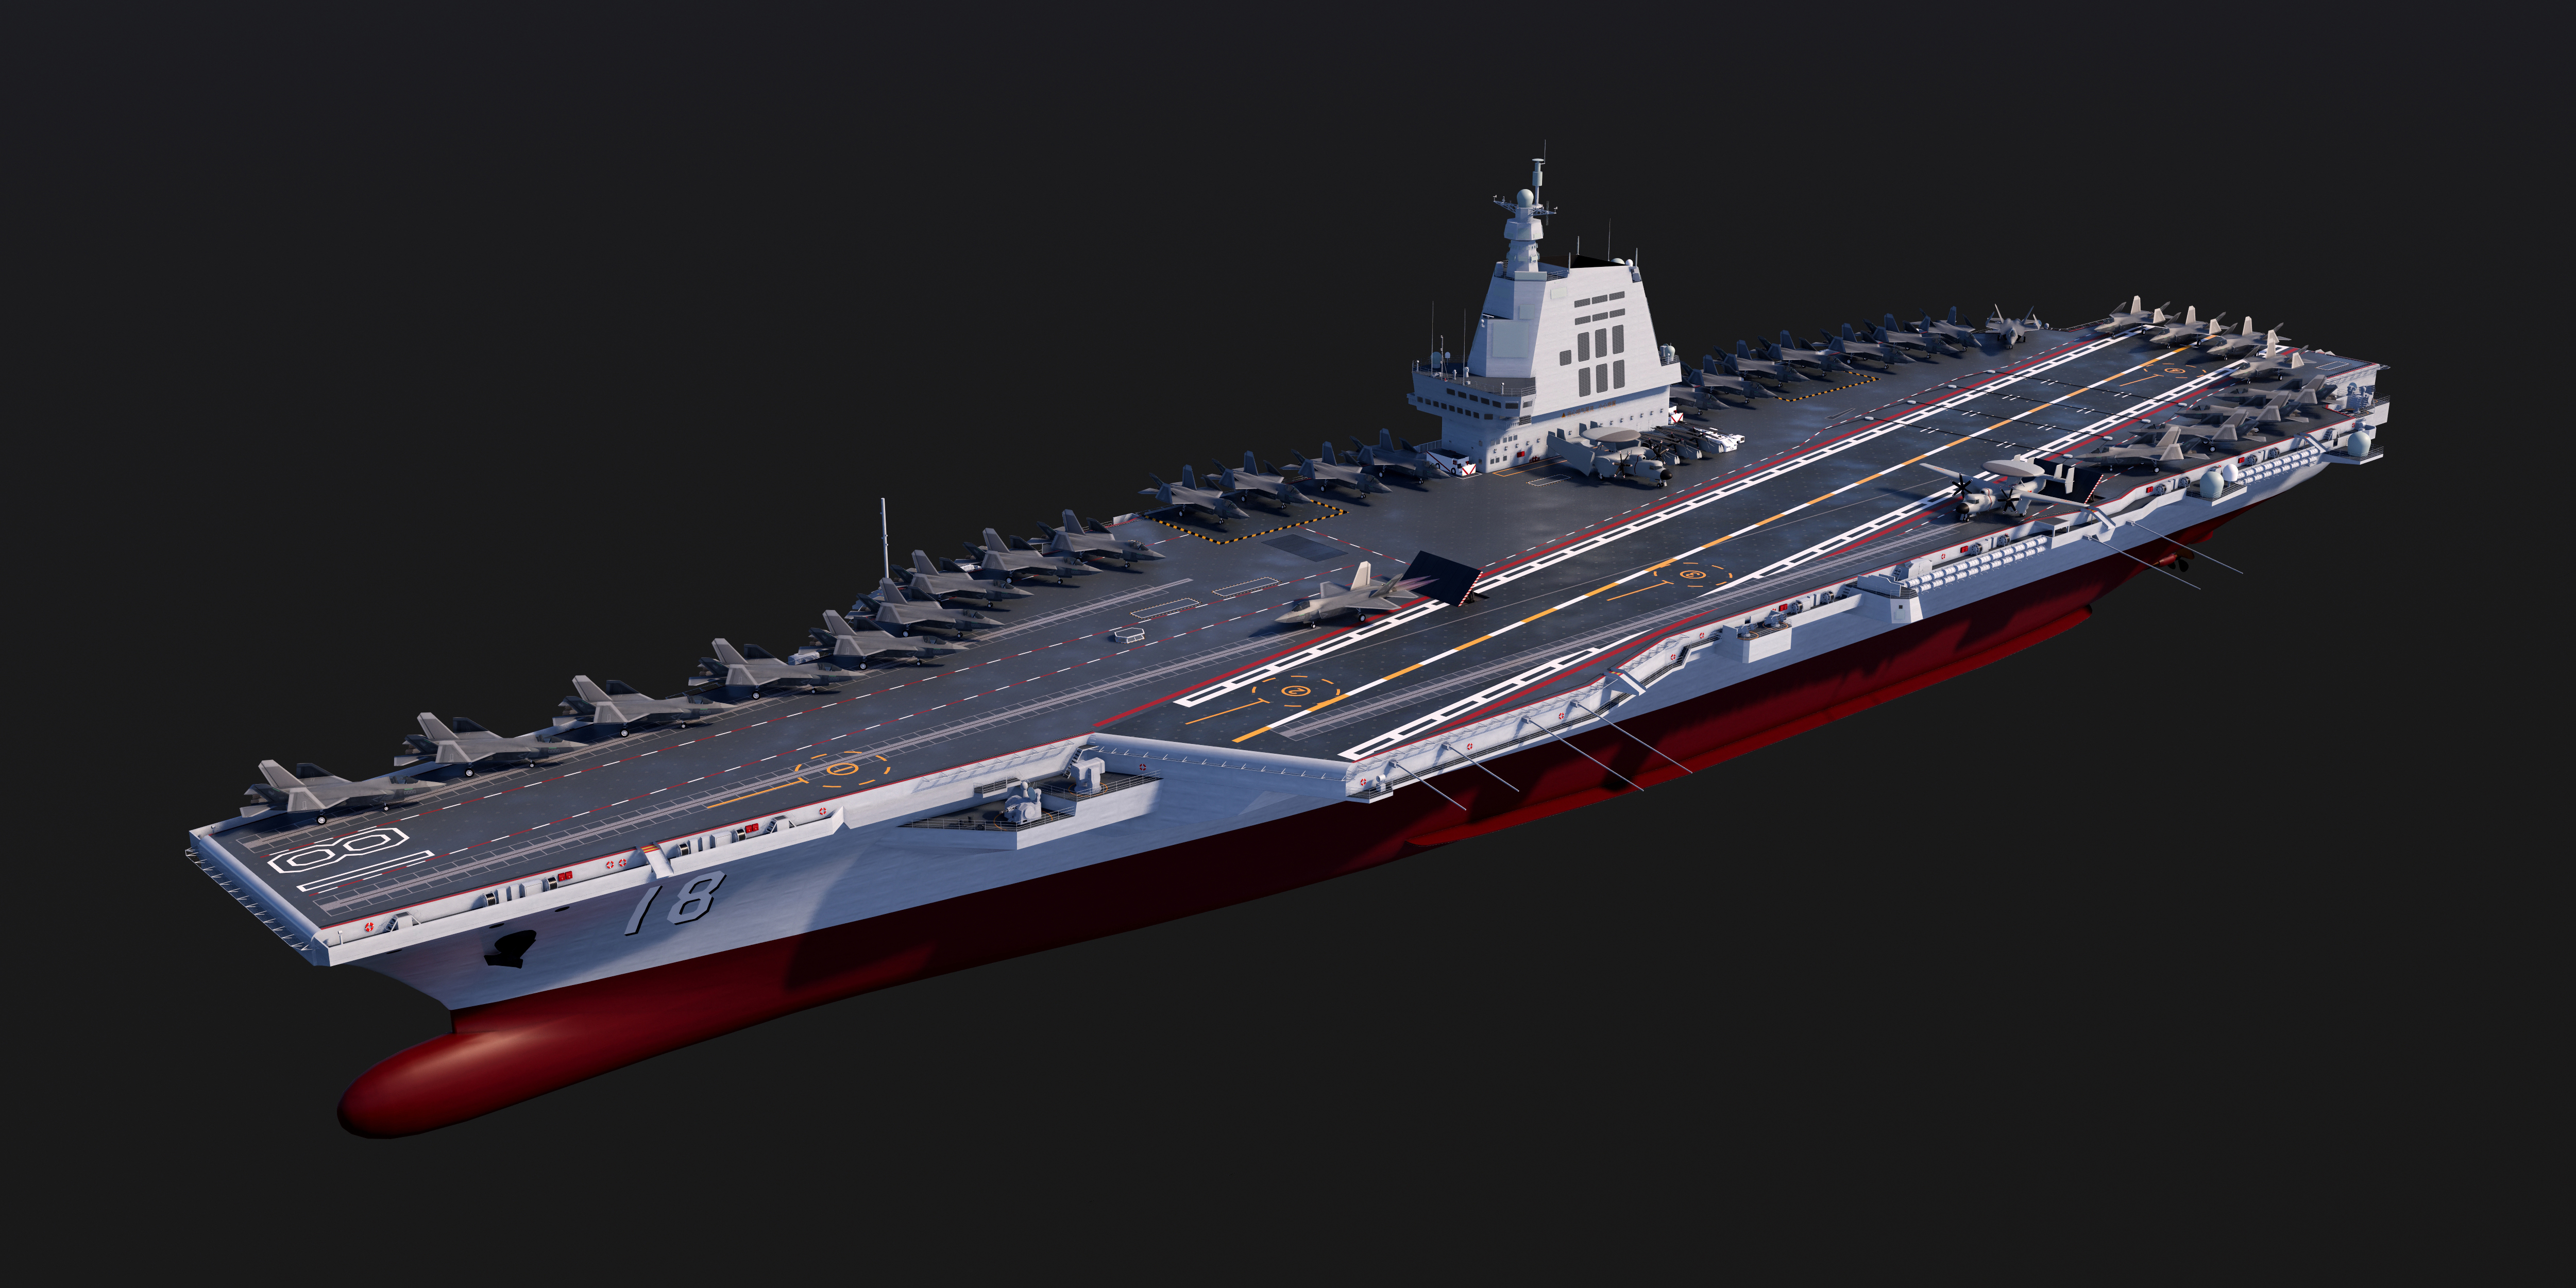 General 5000x2500 People's Liberation Army Navy Type 003 aircraft carrier DaBao CG minimalism military military vehicle aircraft carrier CGI simple background military aircraft